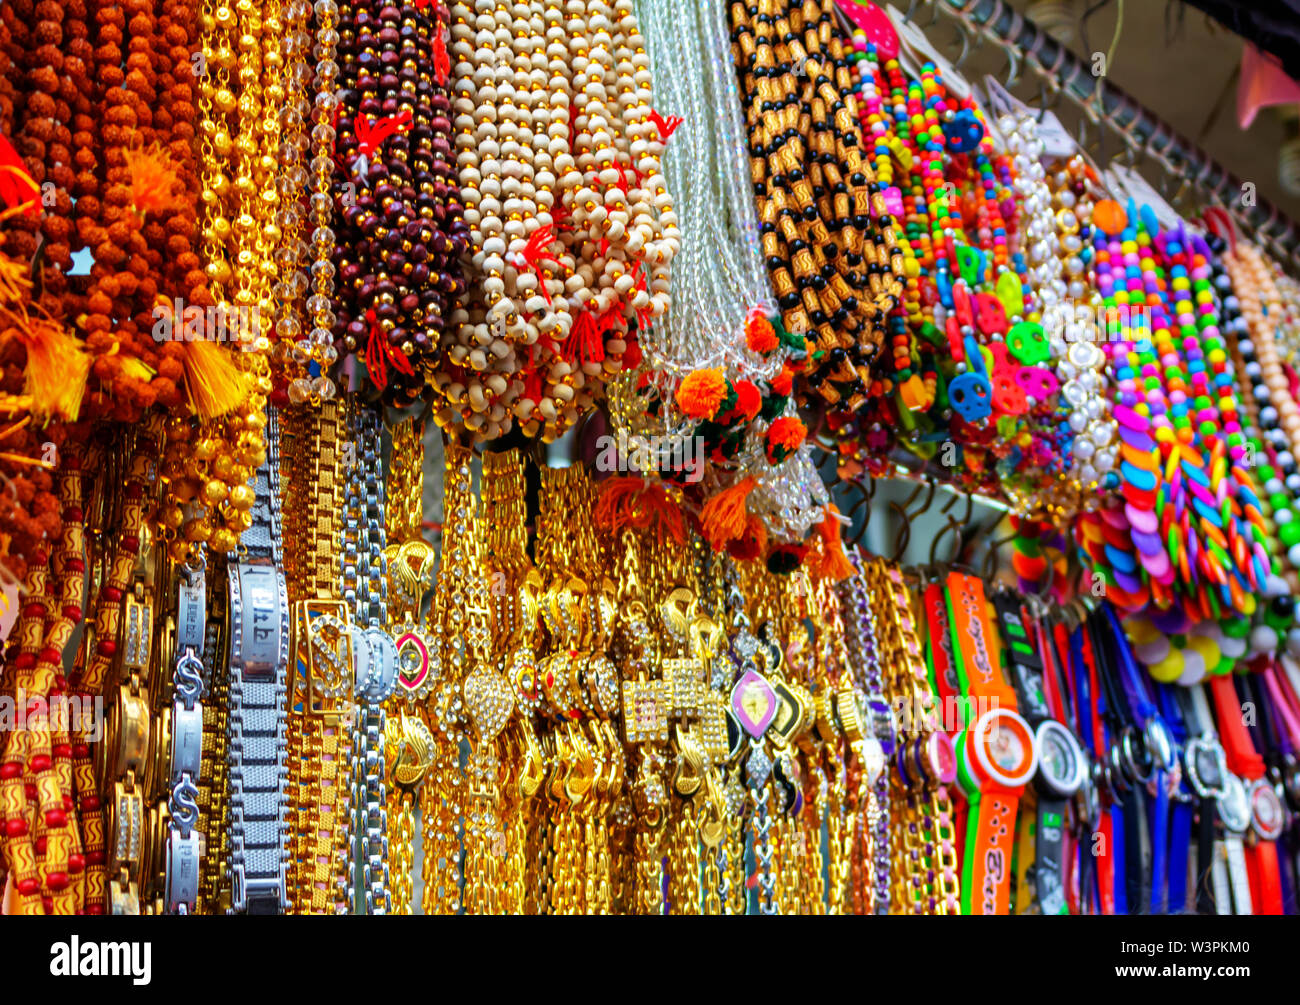 Prayers beads, gift from India. Colorful ethnic wooden beads necklace.street market in katra, Jammu India Stock Photo